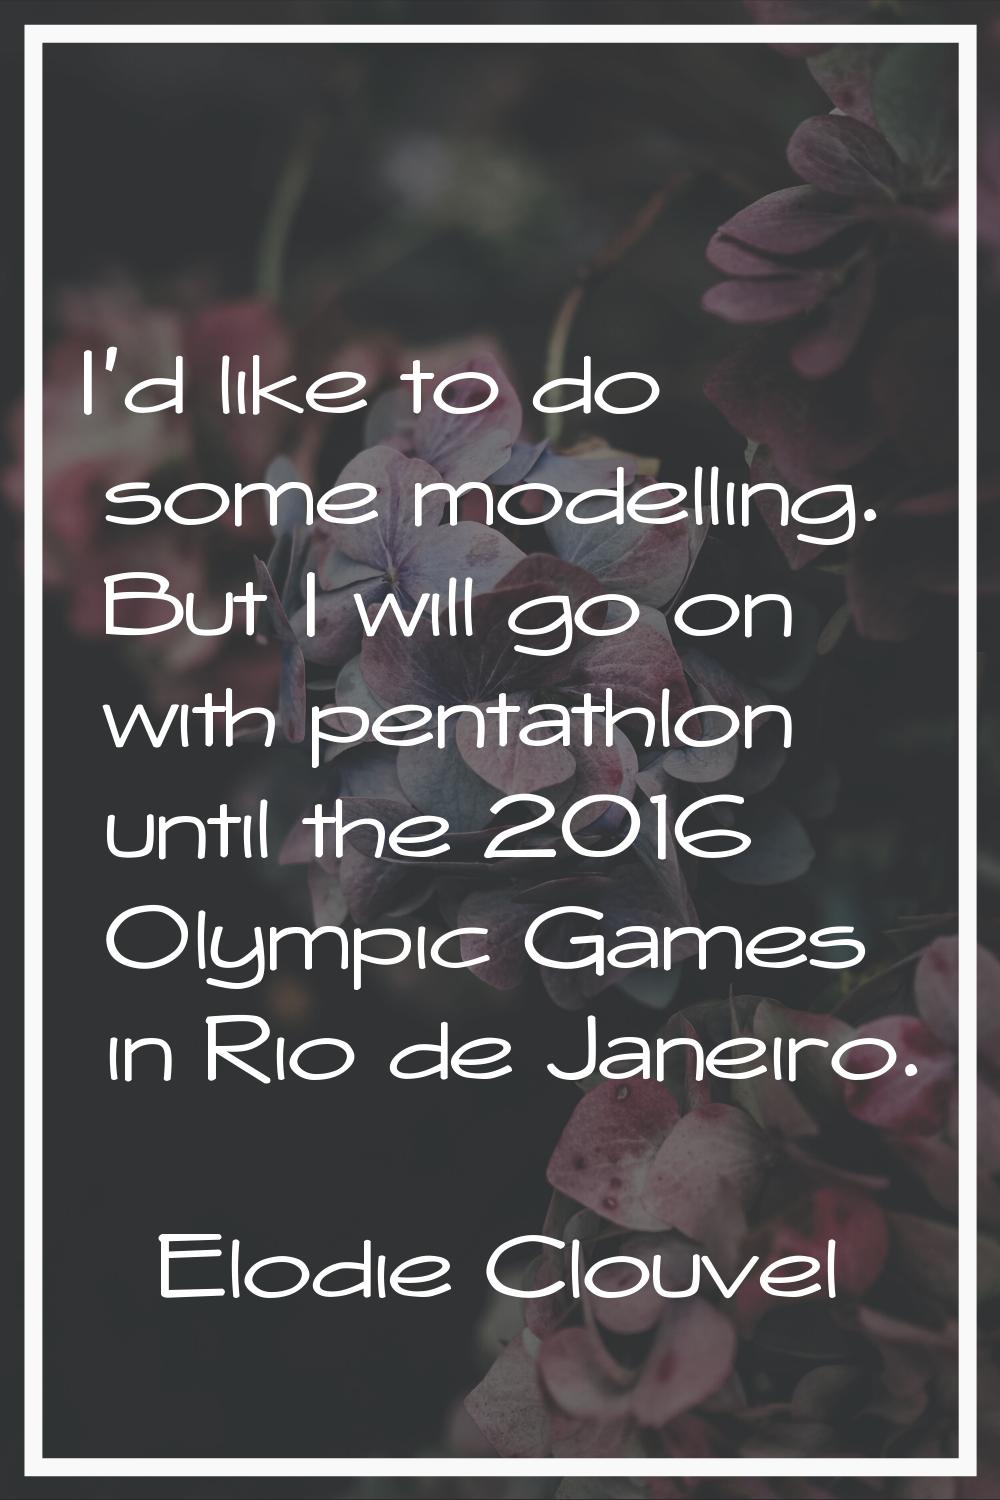 I'd like to do some modelling. But I will go on with pentathlon until the 2016 Olympic Games in Rio